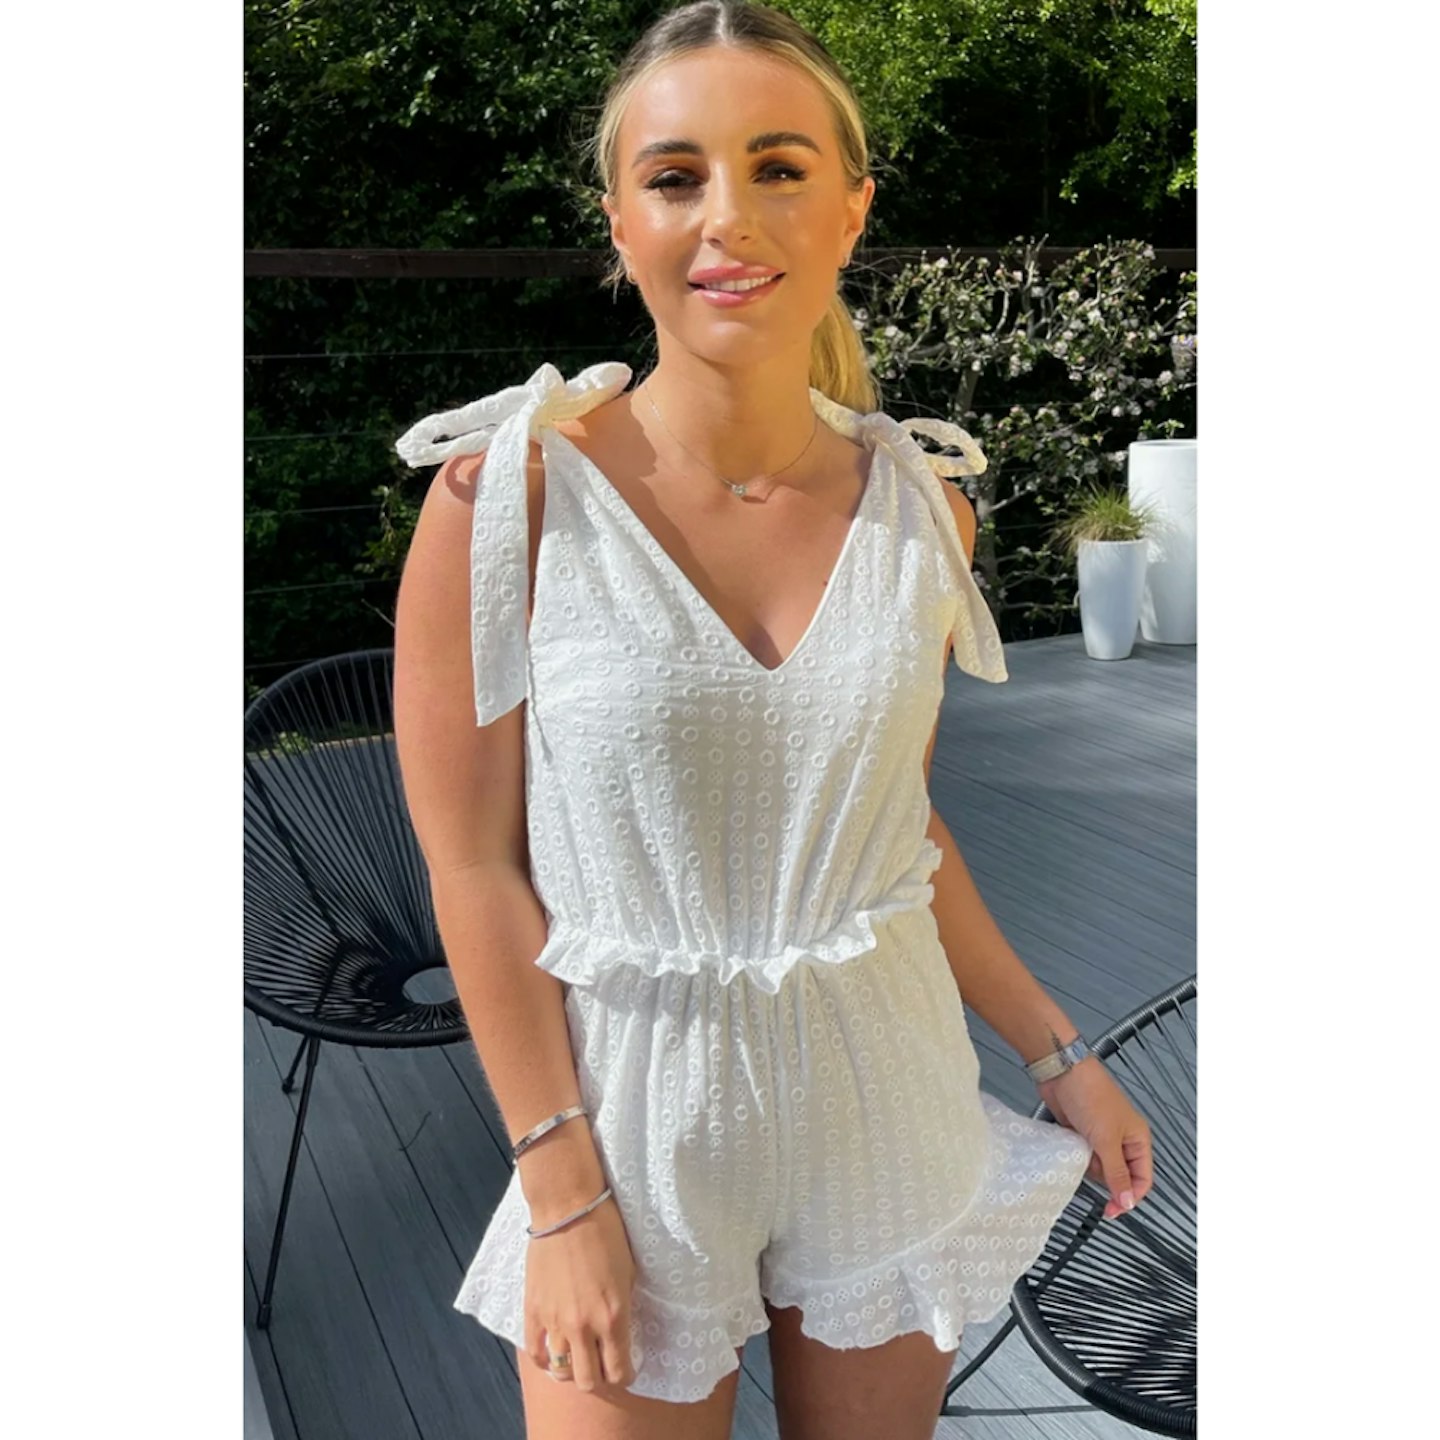 dani dyer in the style